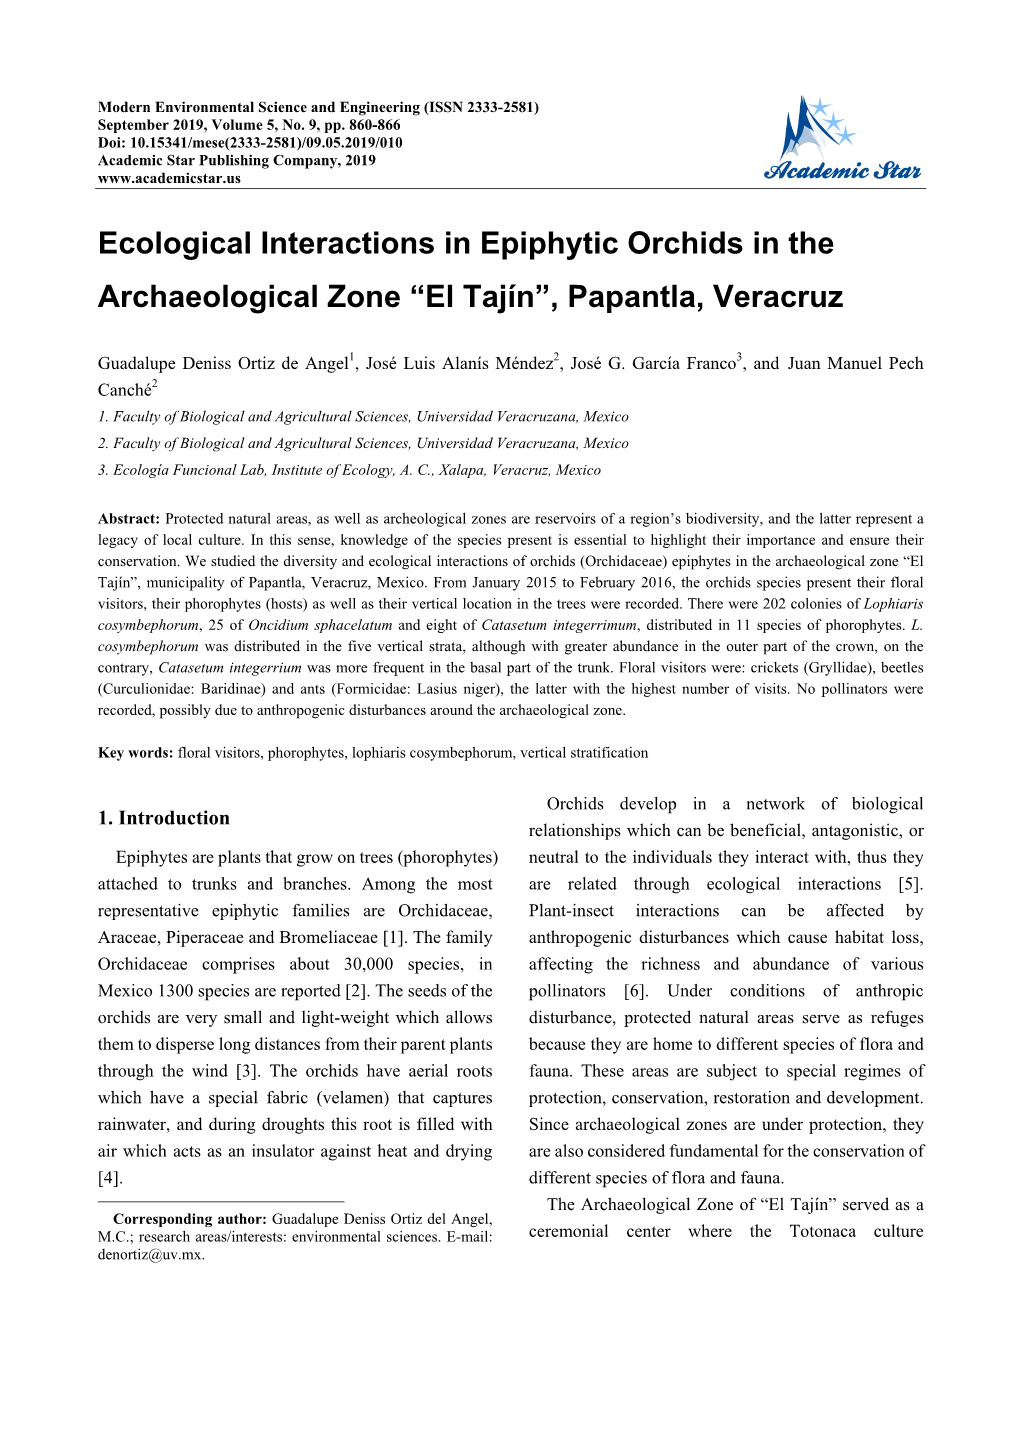 Ecological Interactions in Epiphytic Orchids in the Archaeological Zone “El Tajín”, Papantla, Veracruz